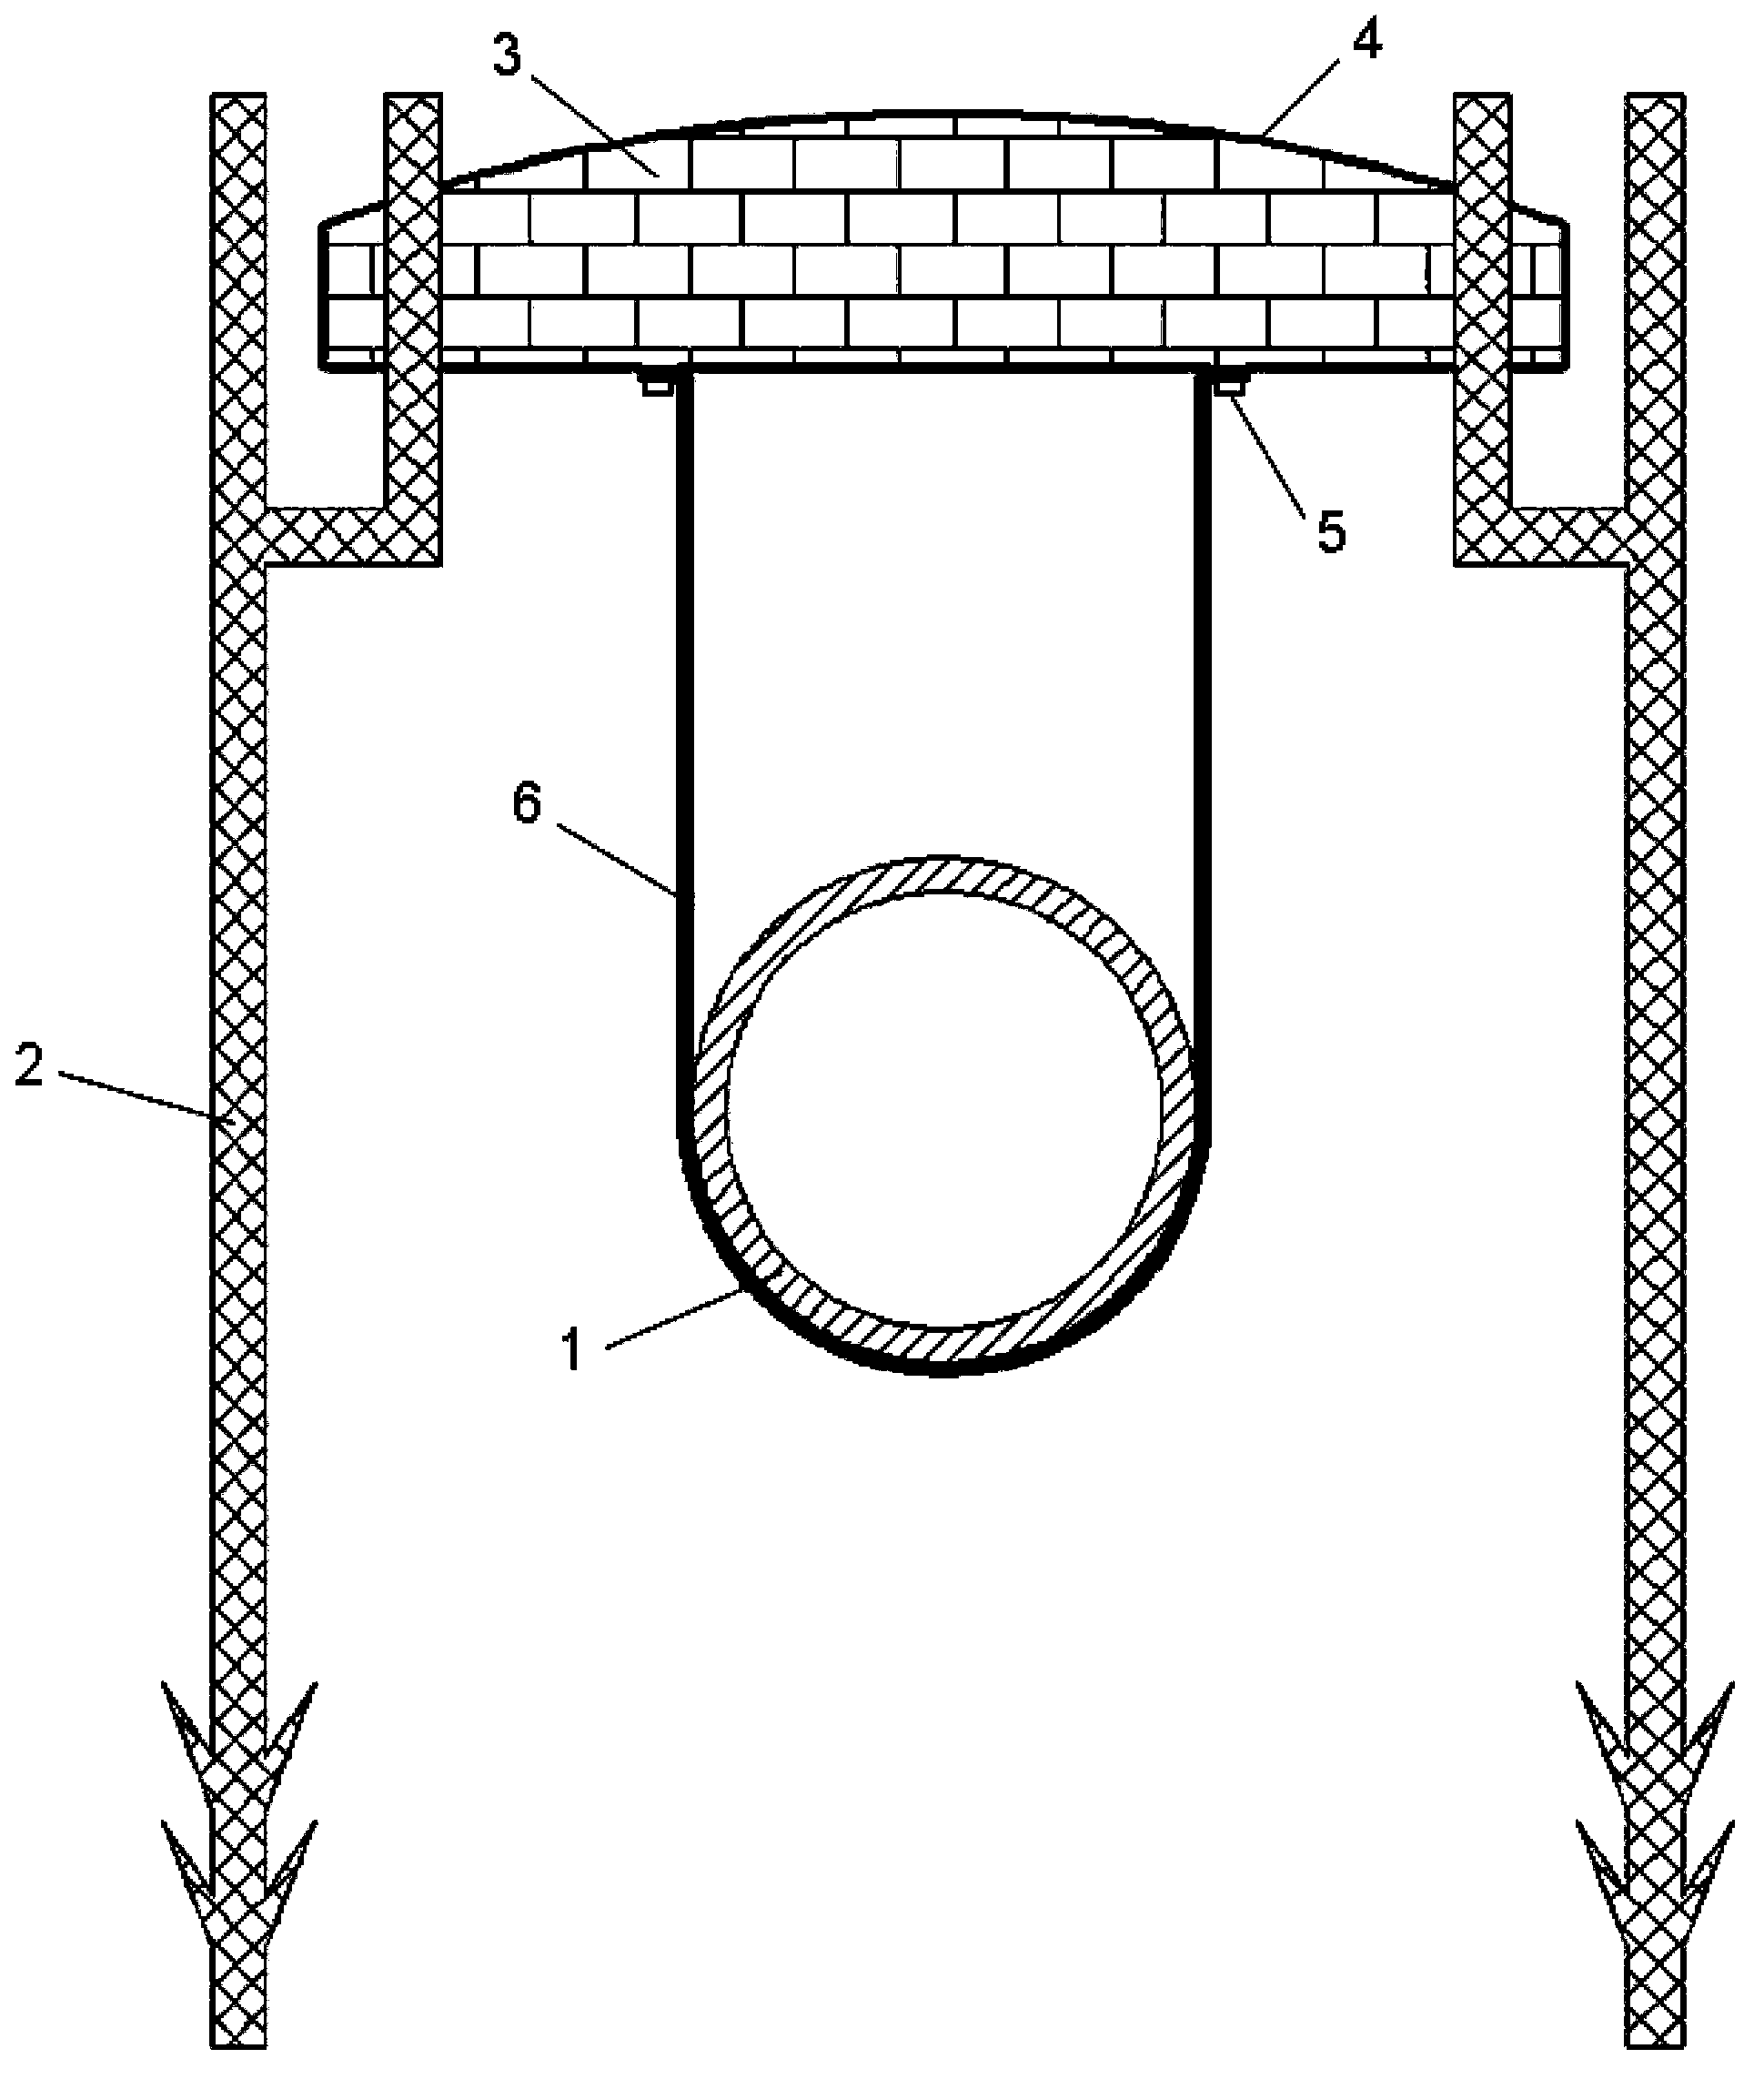 Method and device for controlling thaw settlement of pipes in permafrost regions by pontoon device